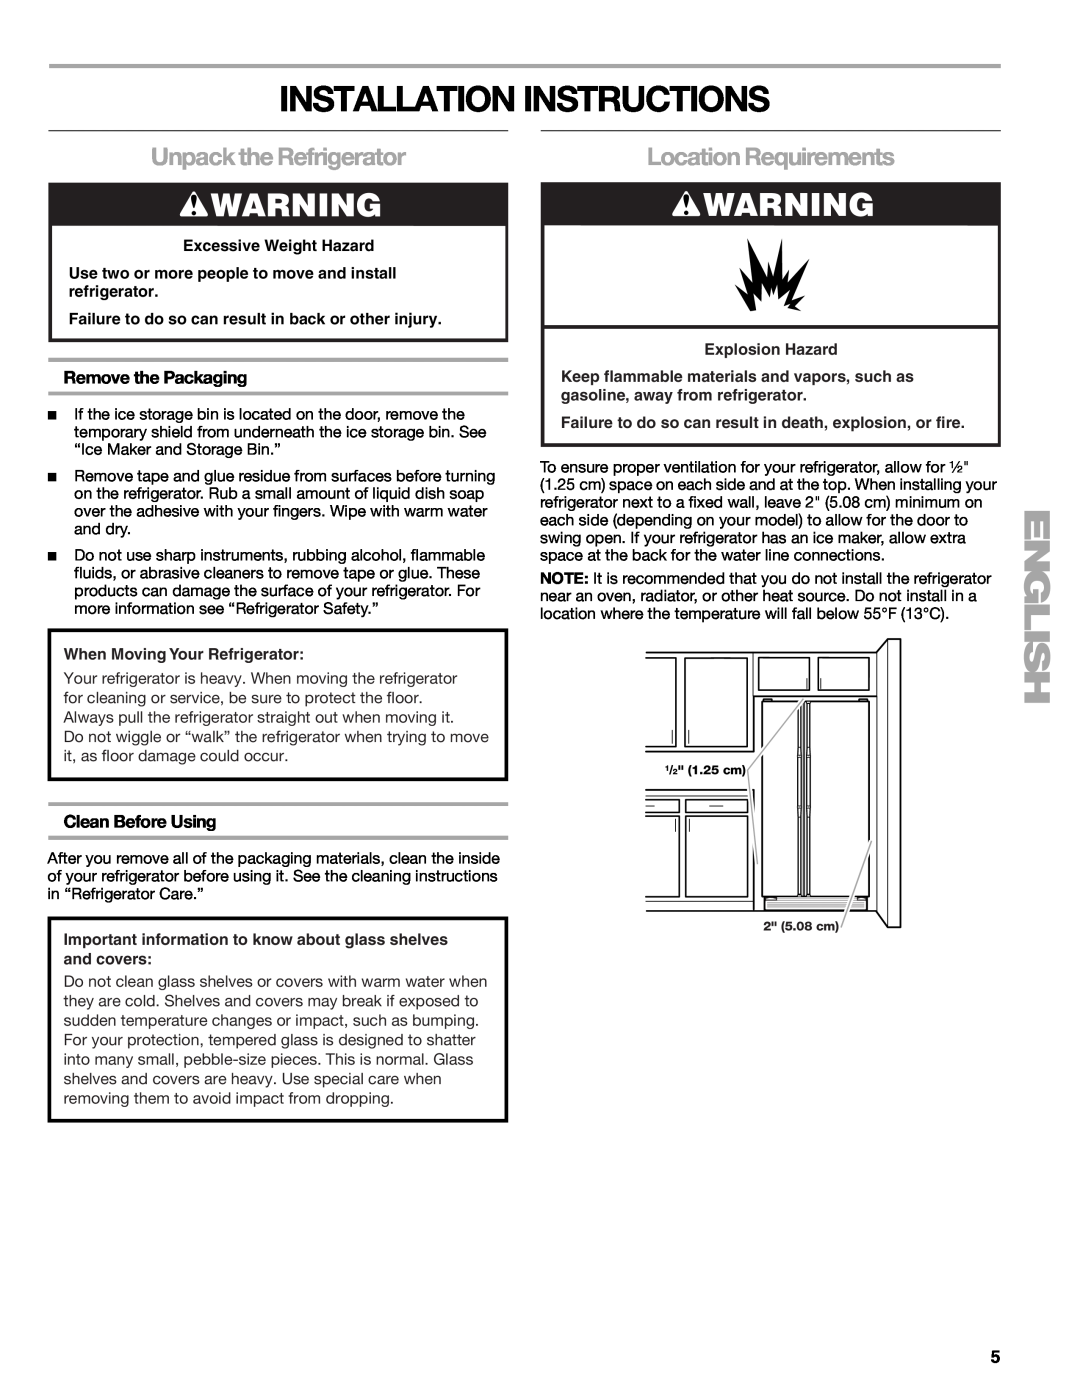 Sears T1KB2/T1RFKB2 manual Installation Instructions, Unpack the Refrigerator, Location Requirements, Remove the Packaging 